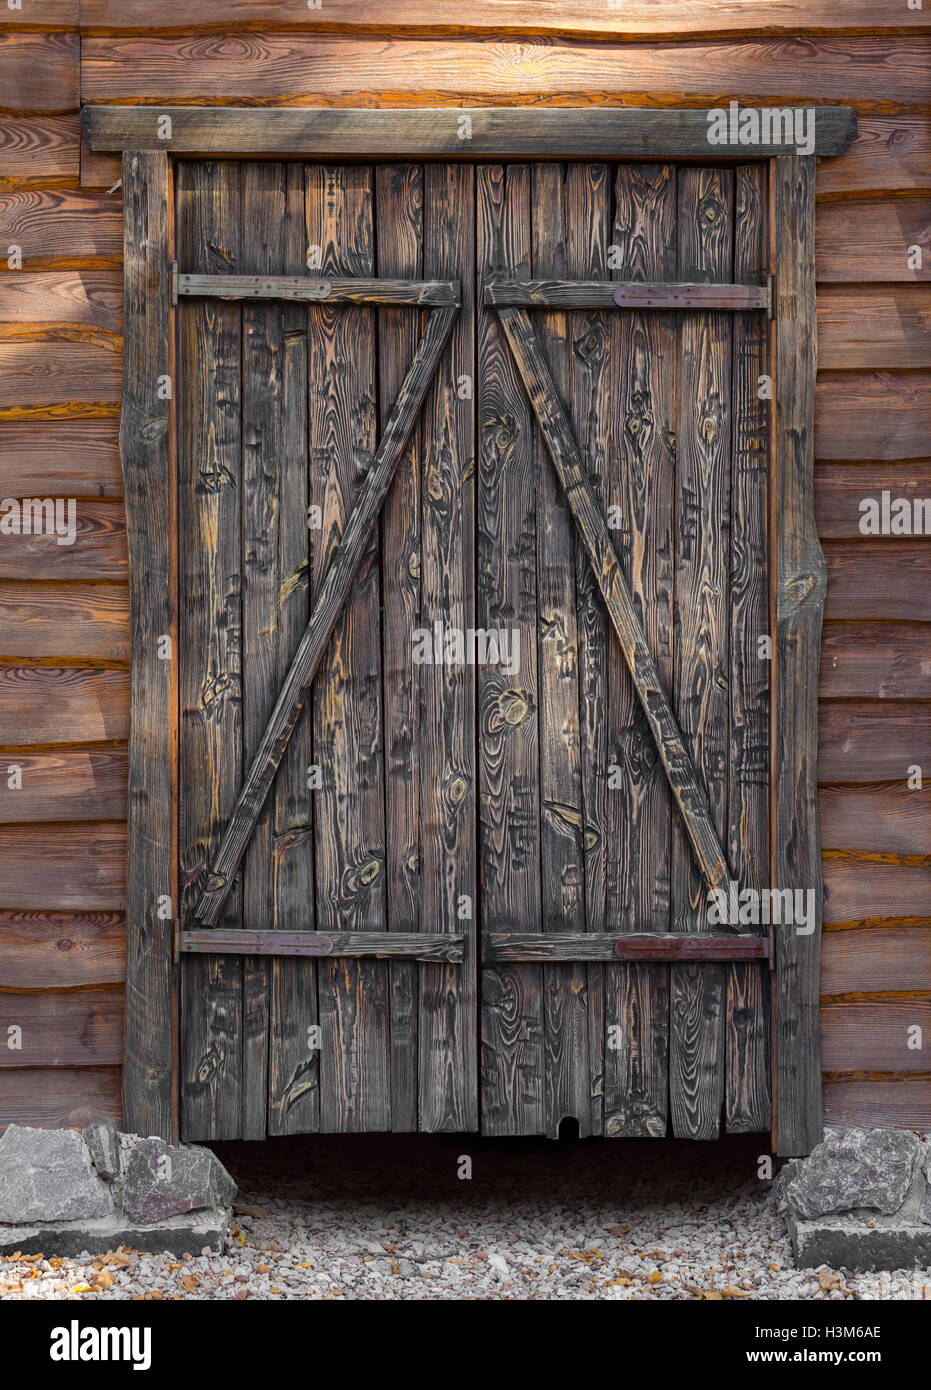 architectural element, old the wooden gate closeup Stock Photo